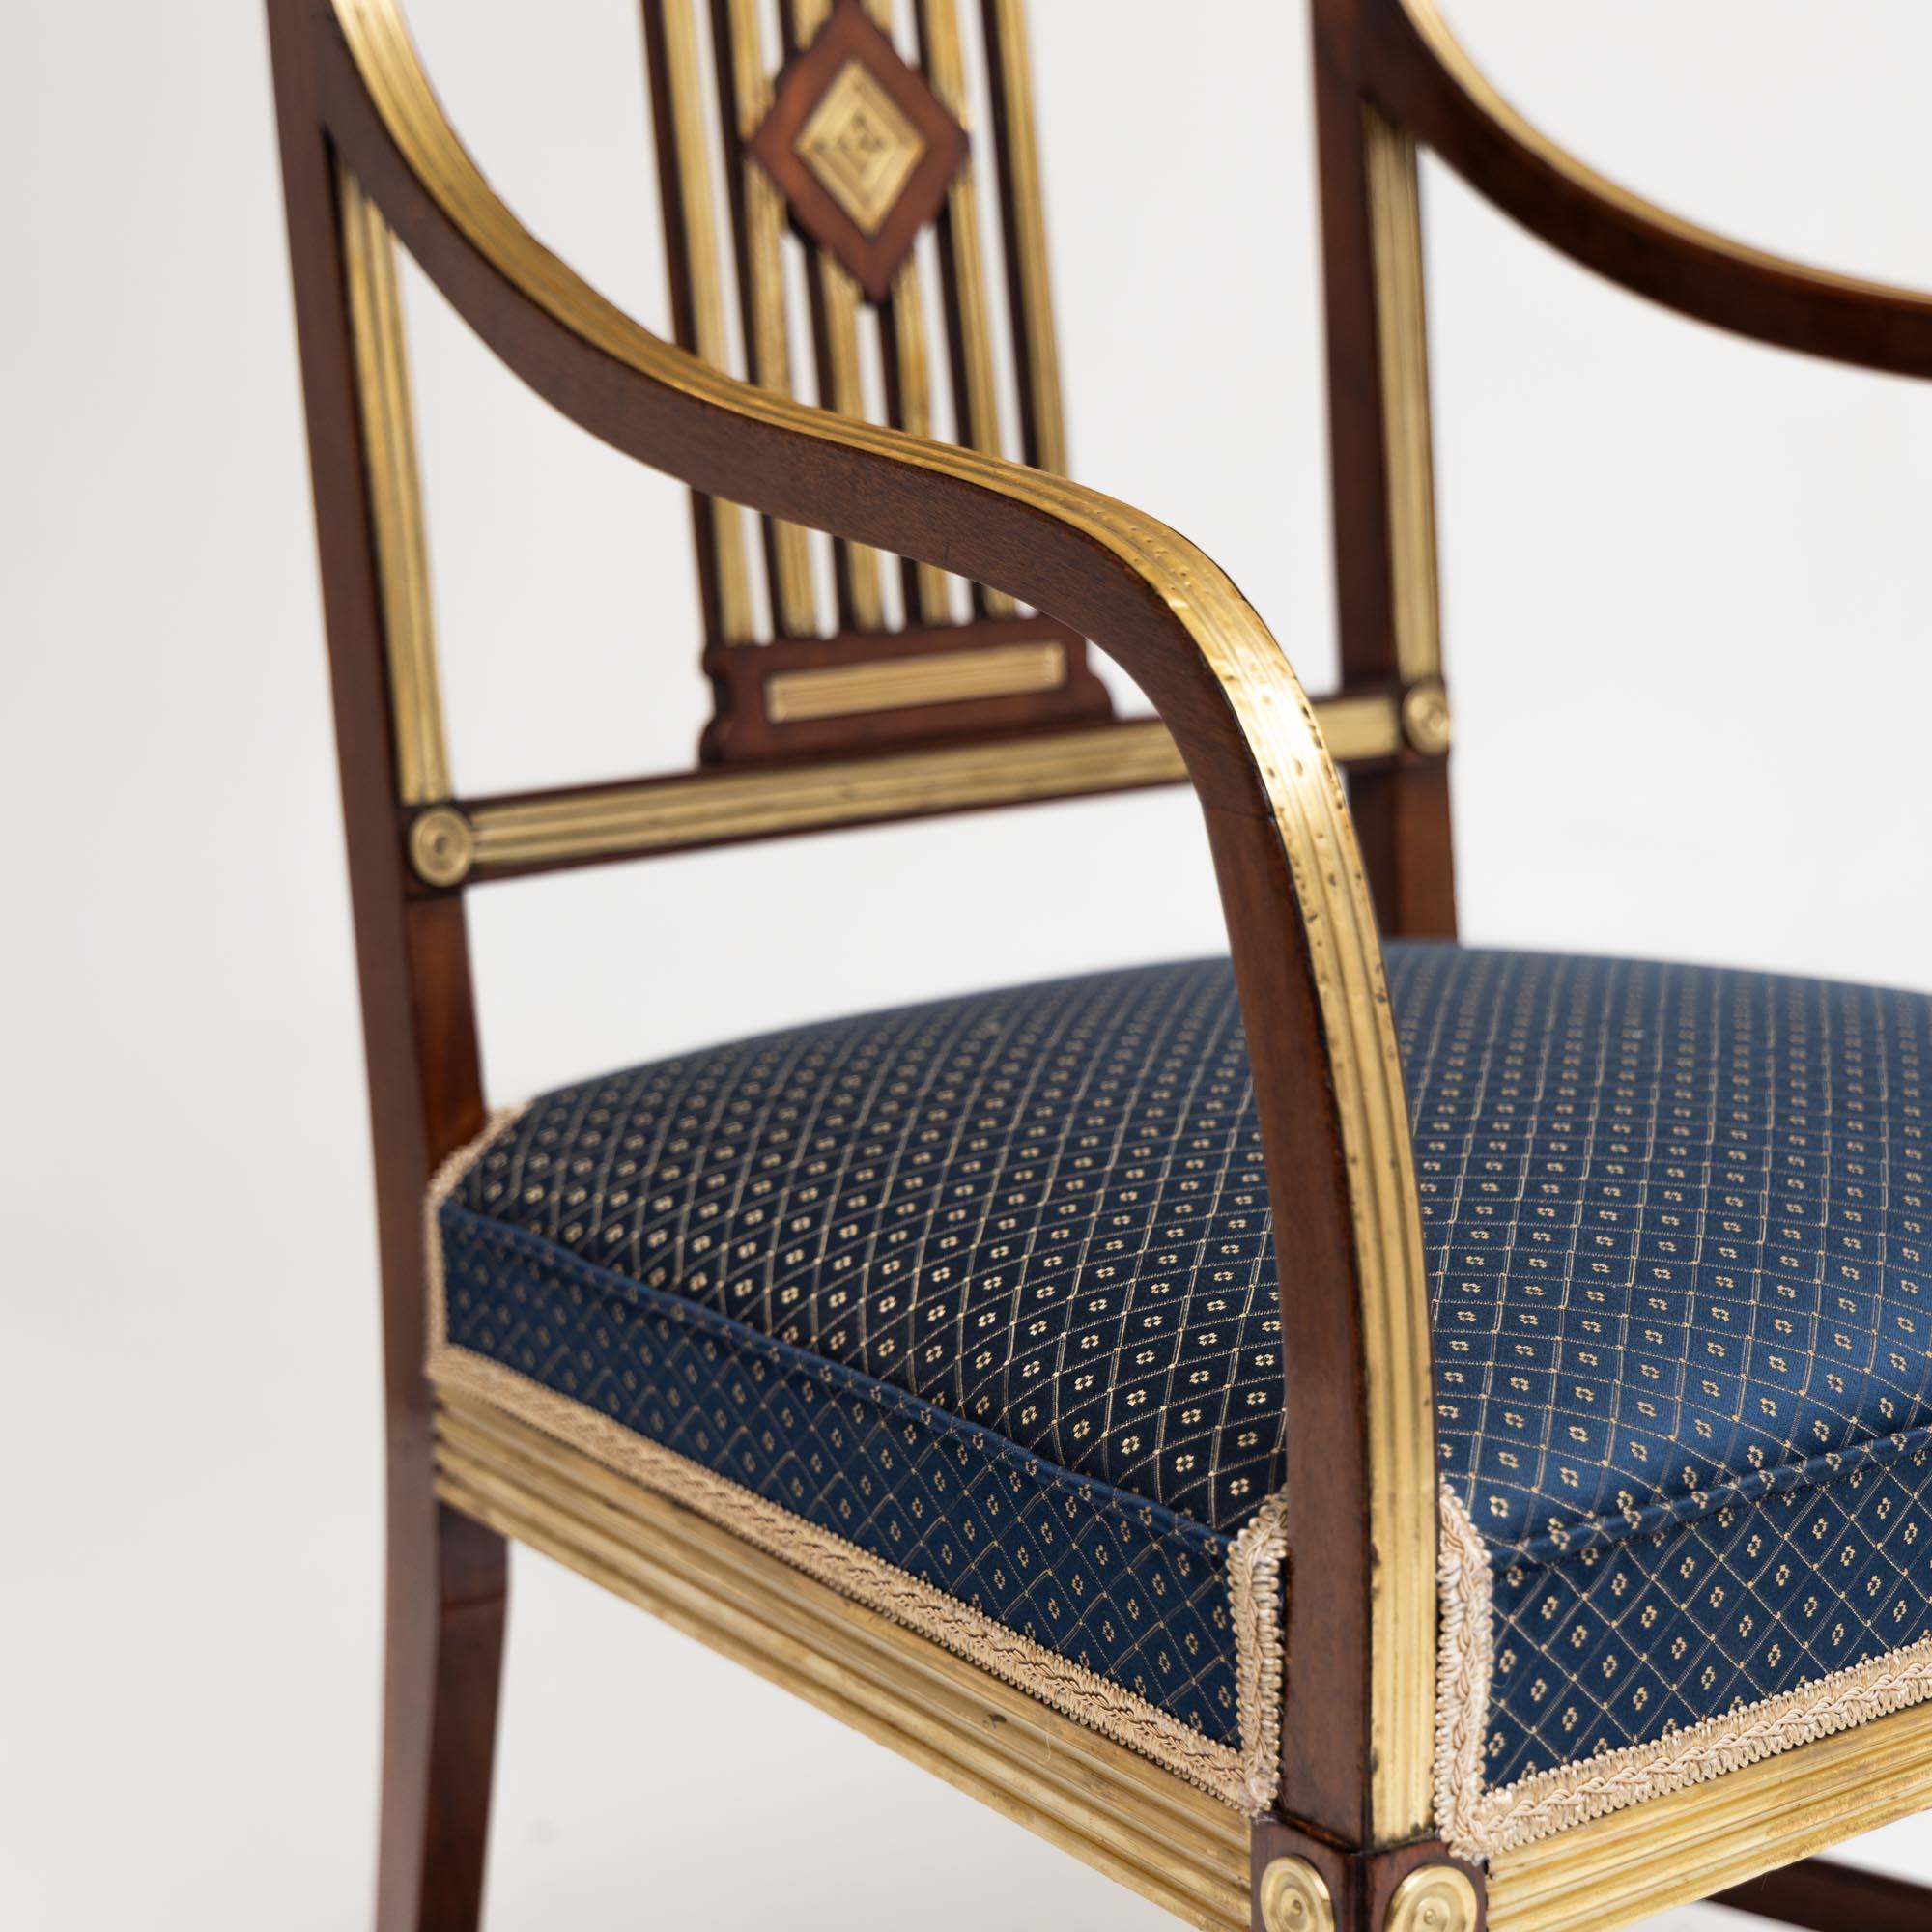 Pair of Neoclassical Dining Room Chairs, Brass, Baltic States, Late 18th Century For Sale 5